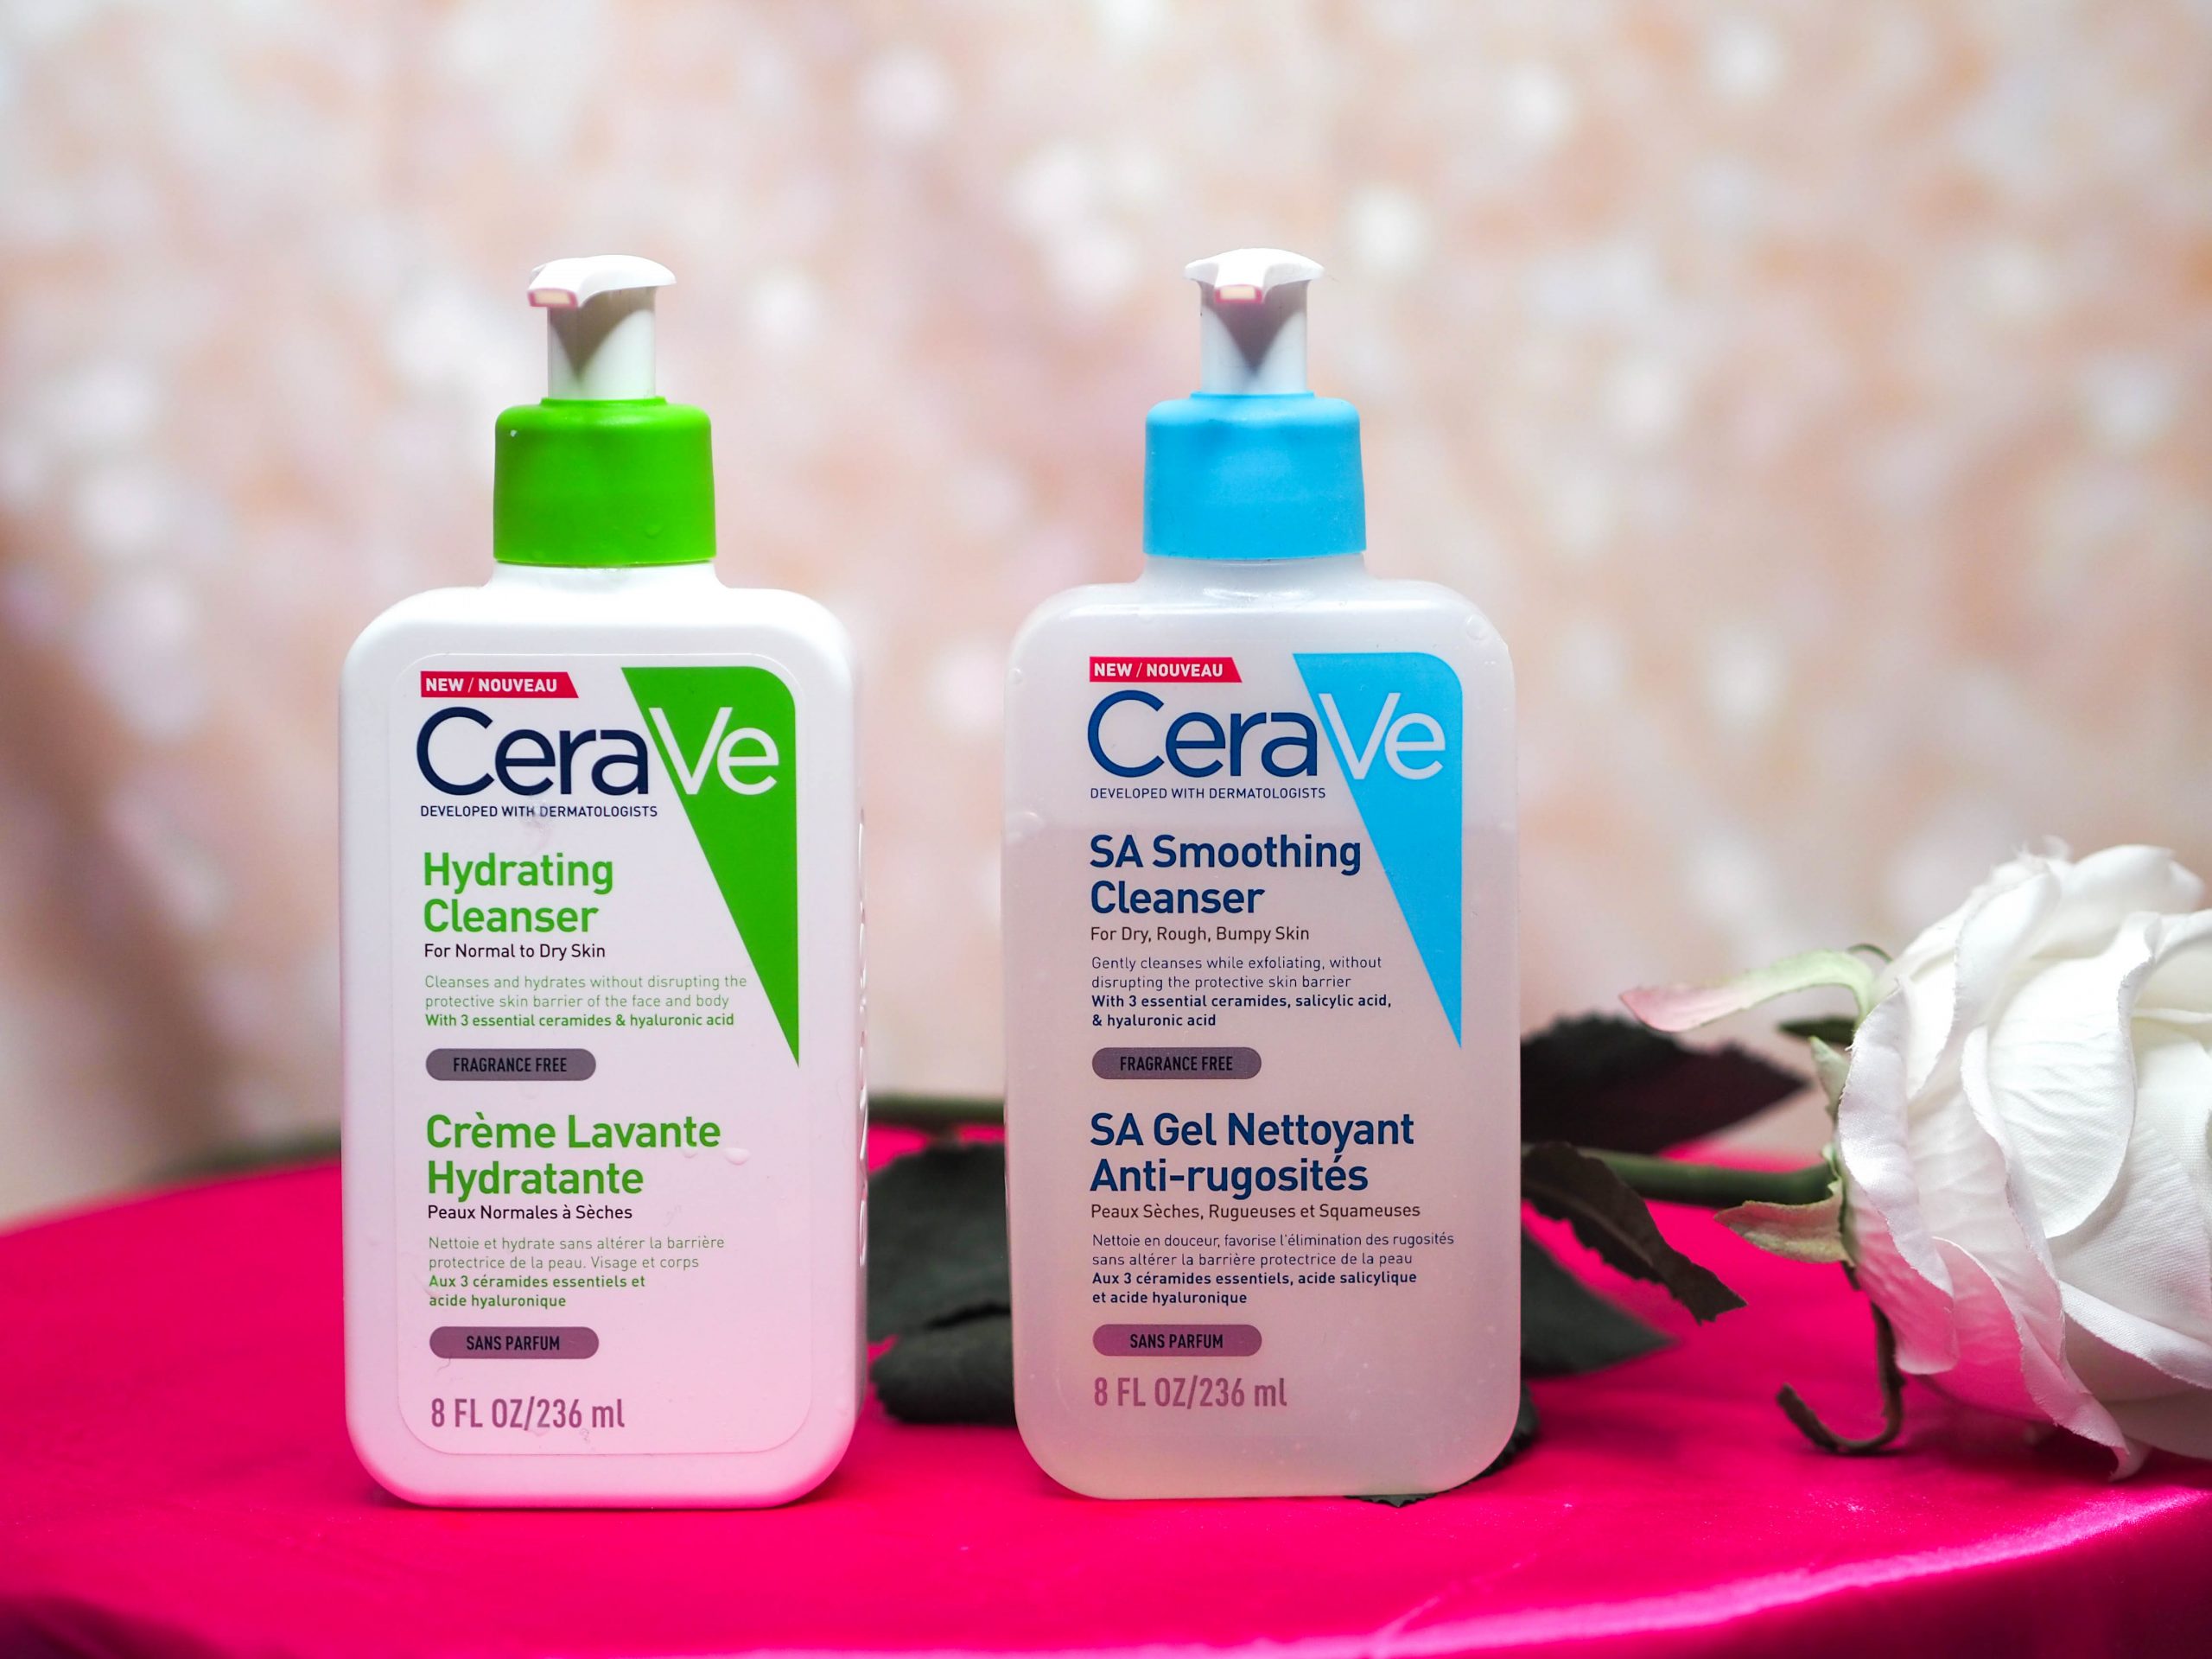 cerave-hydrating-cleanser-and-cerave-sa-smoothing-cleanser-review-beauty-geek-uk